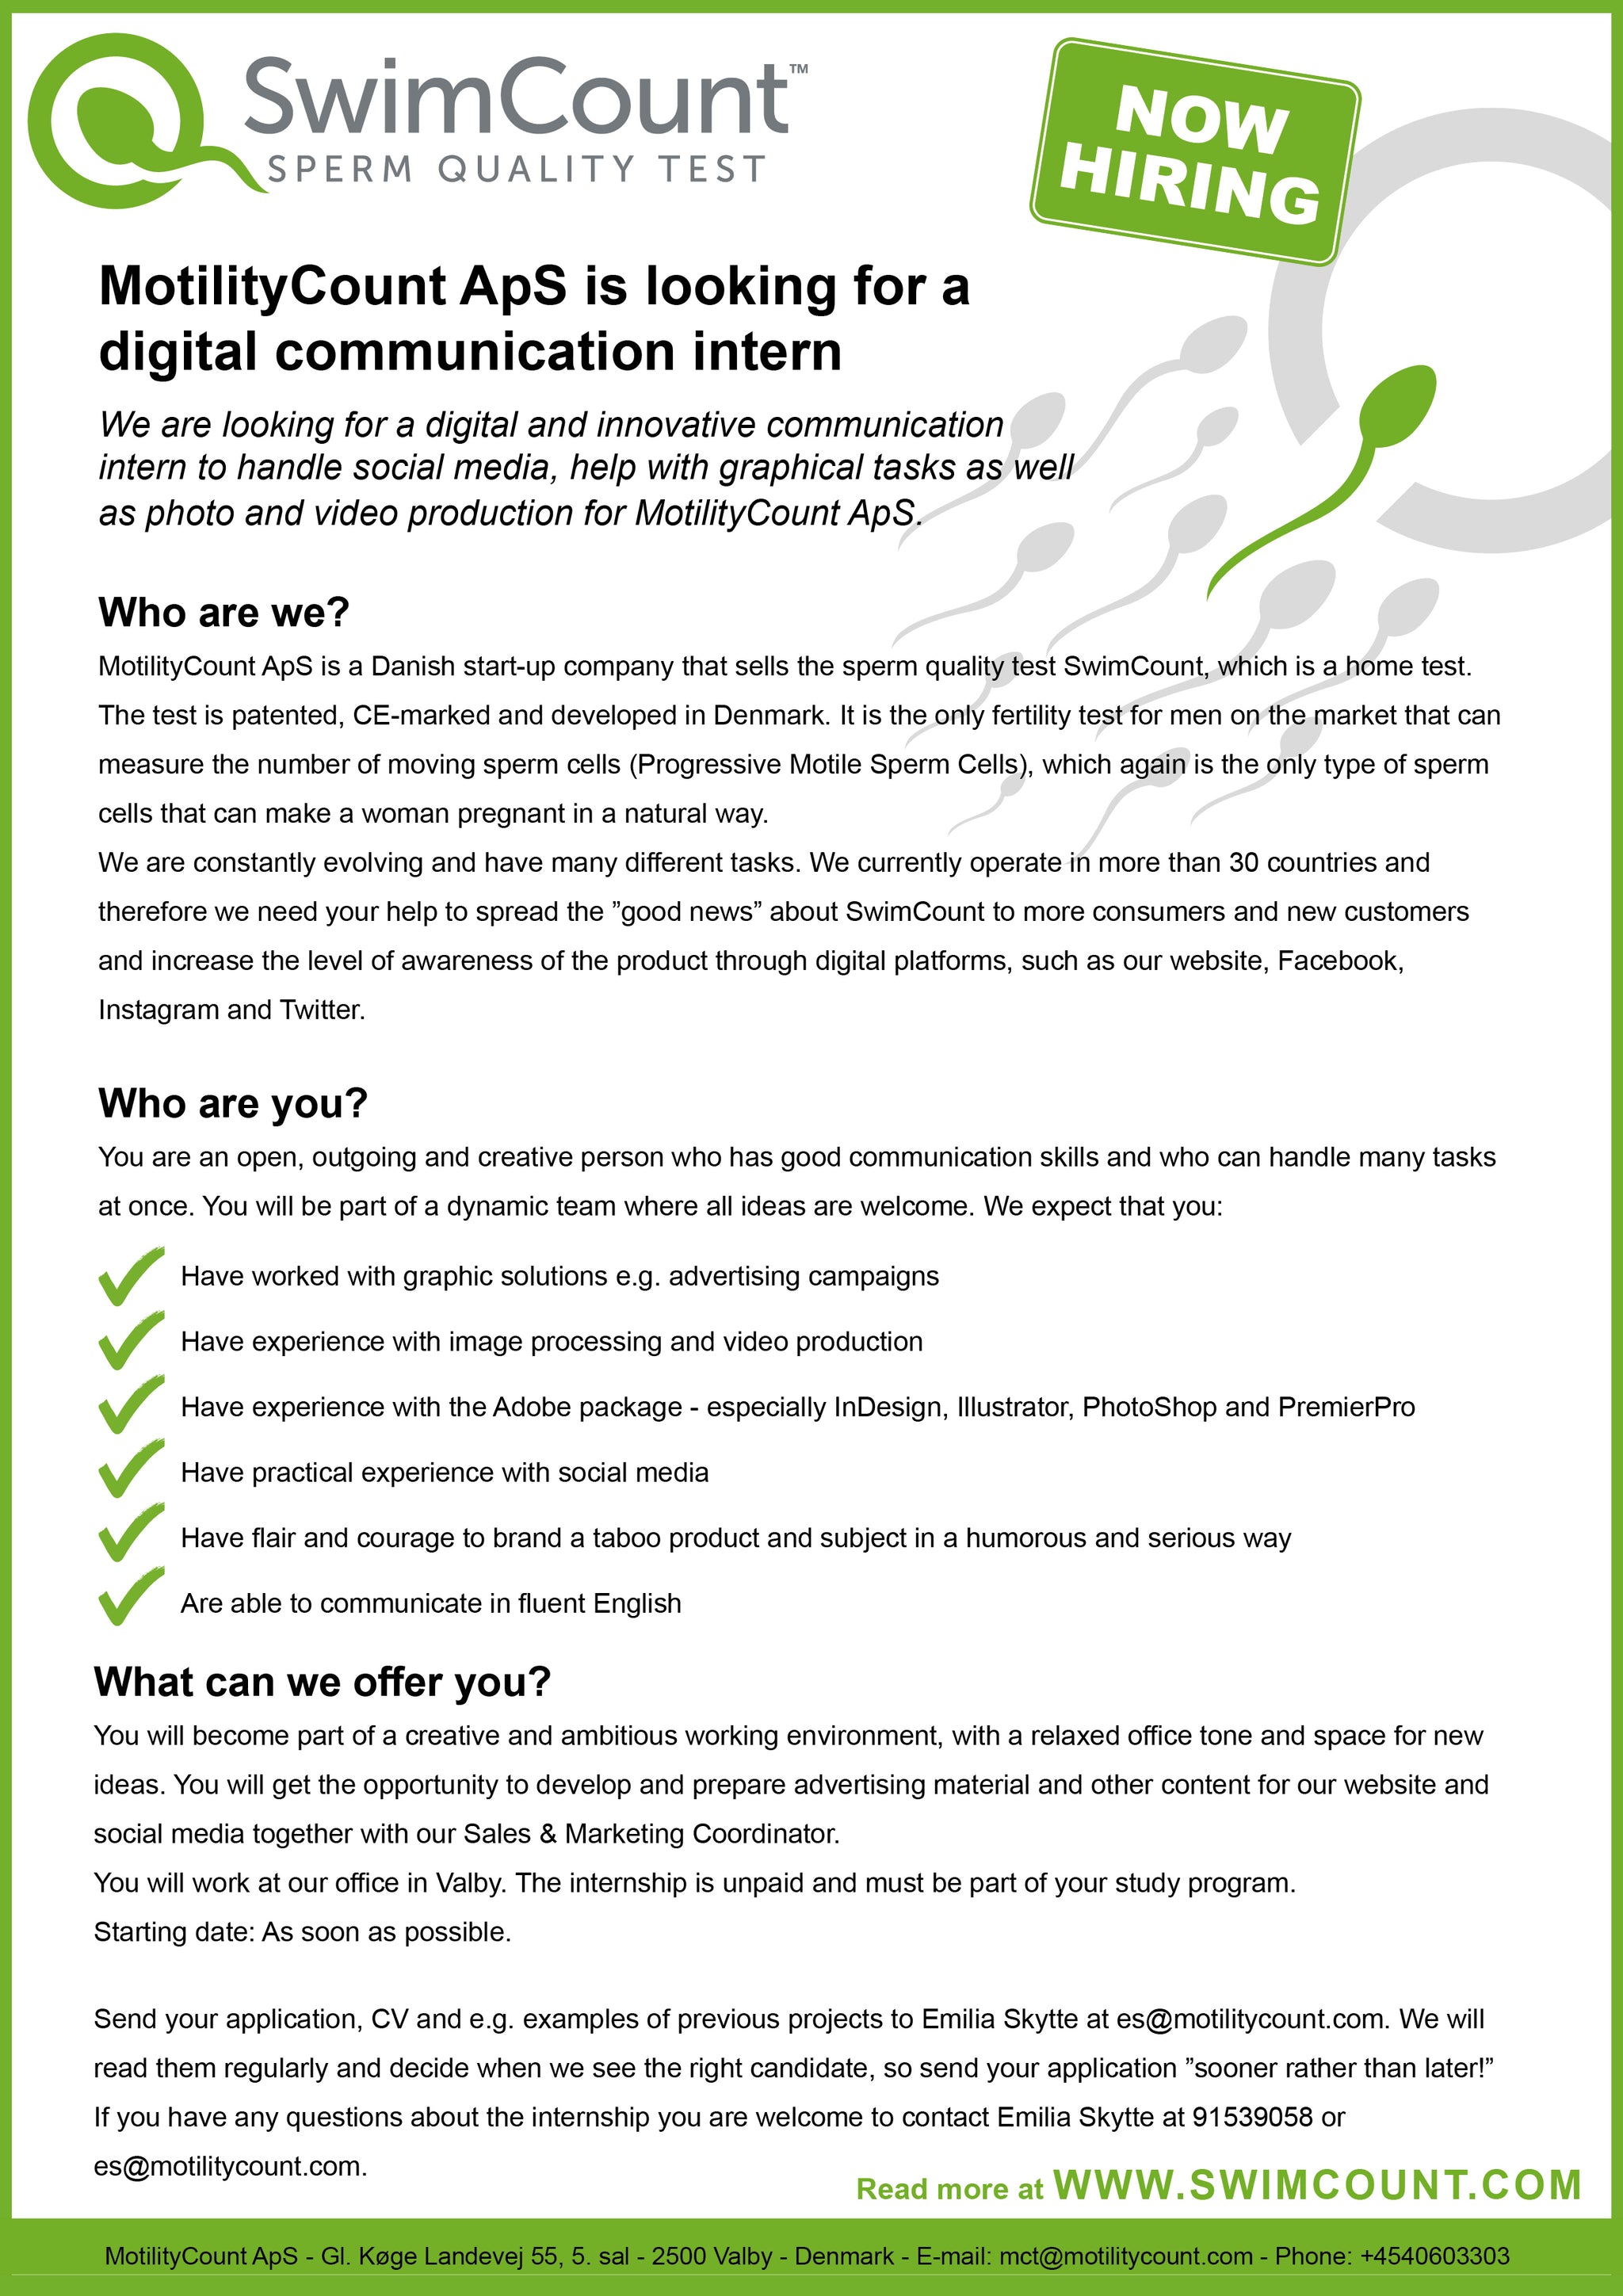 MotilityCount ApS is looking for a Digital Communication Intern